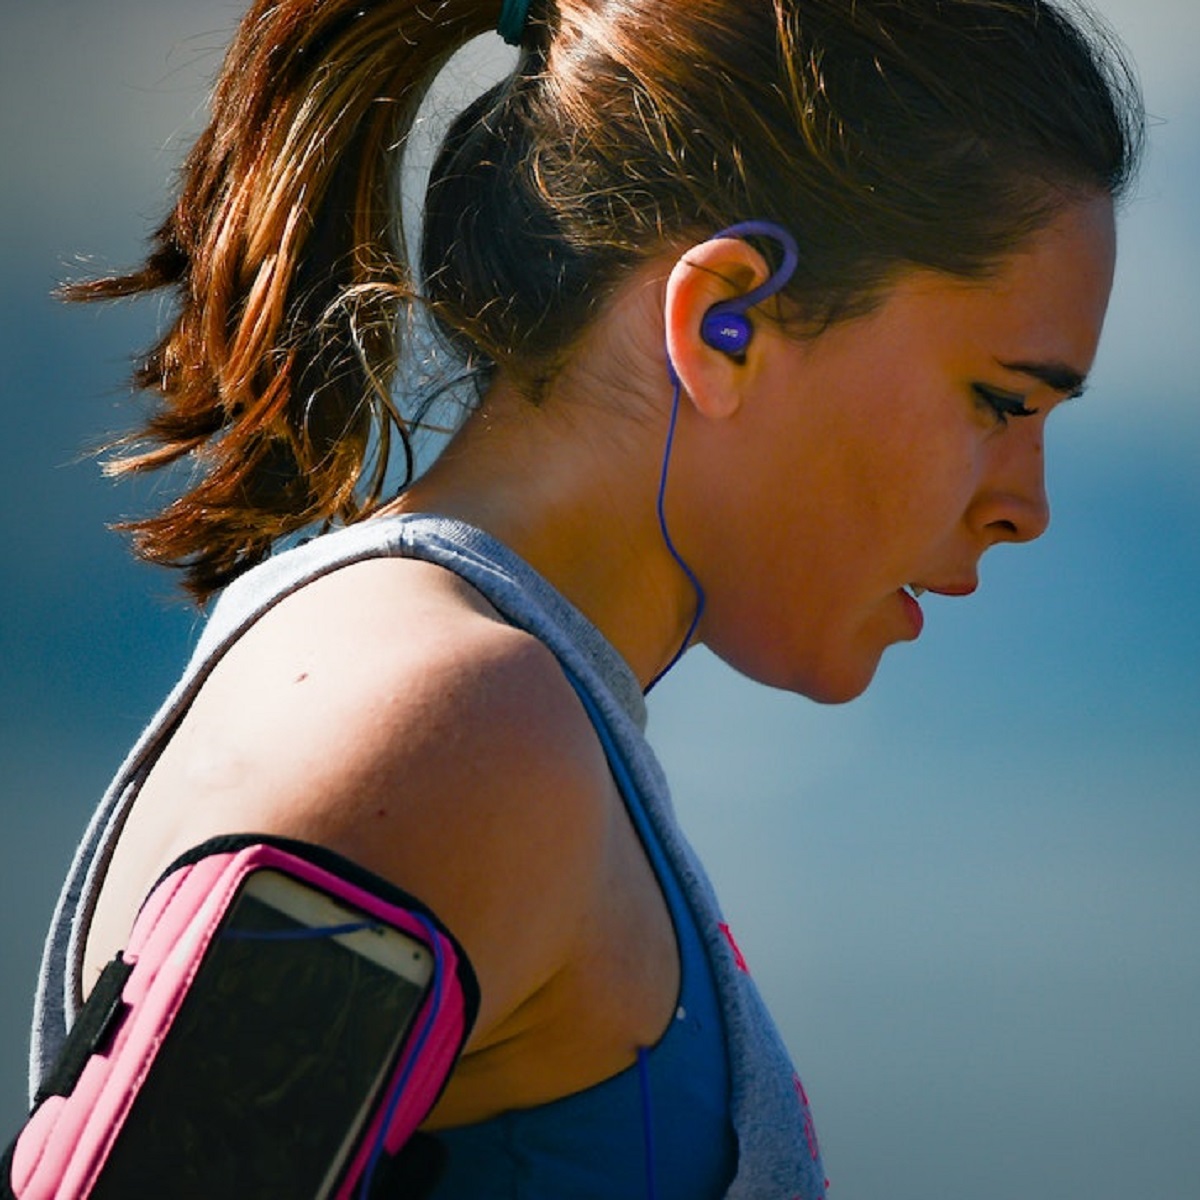 woman-with-headphones-ready-for-a-run